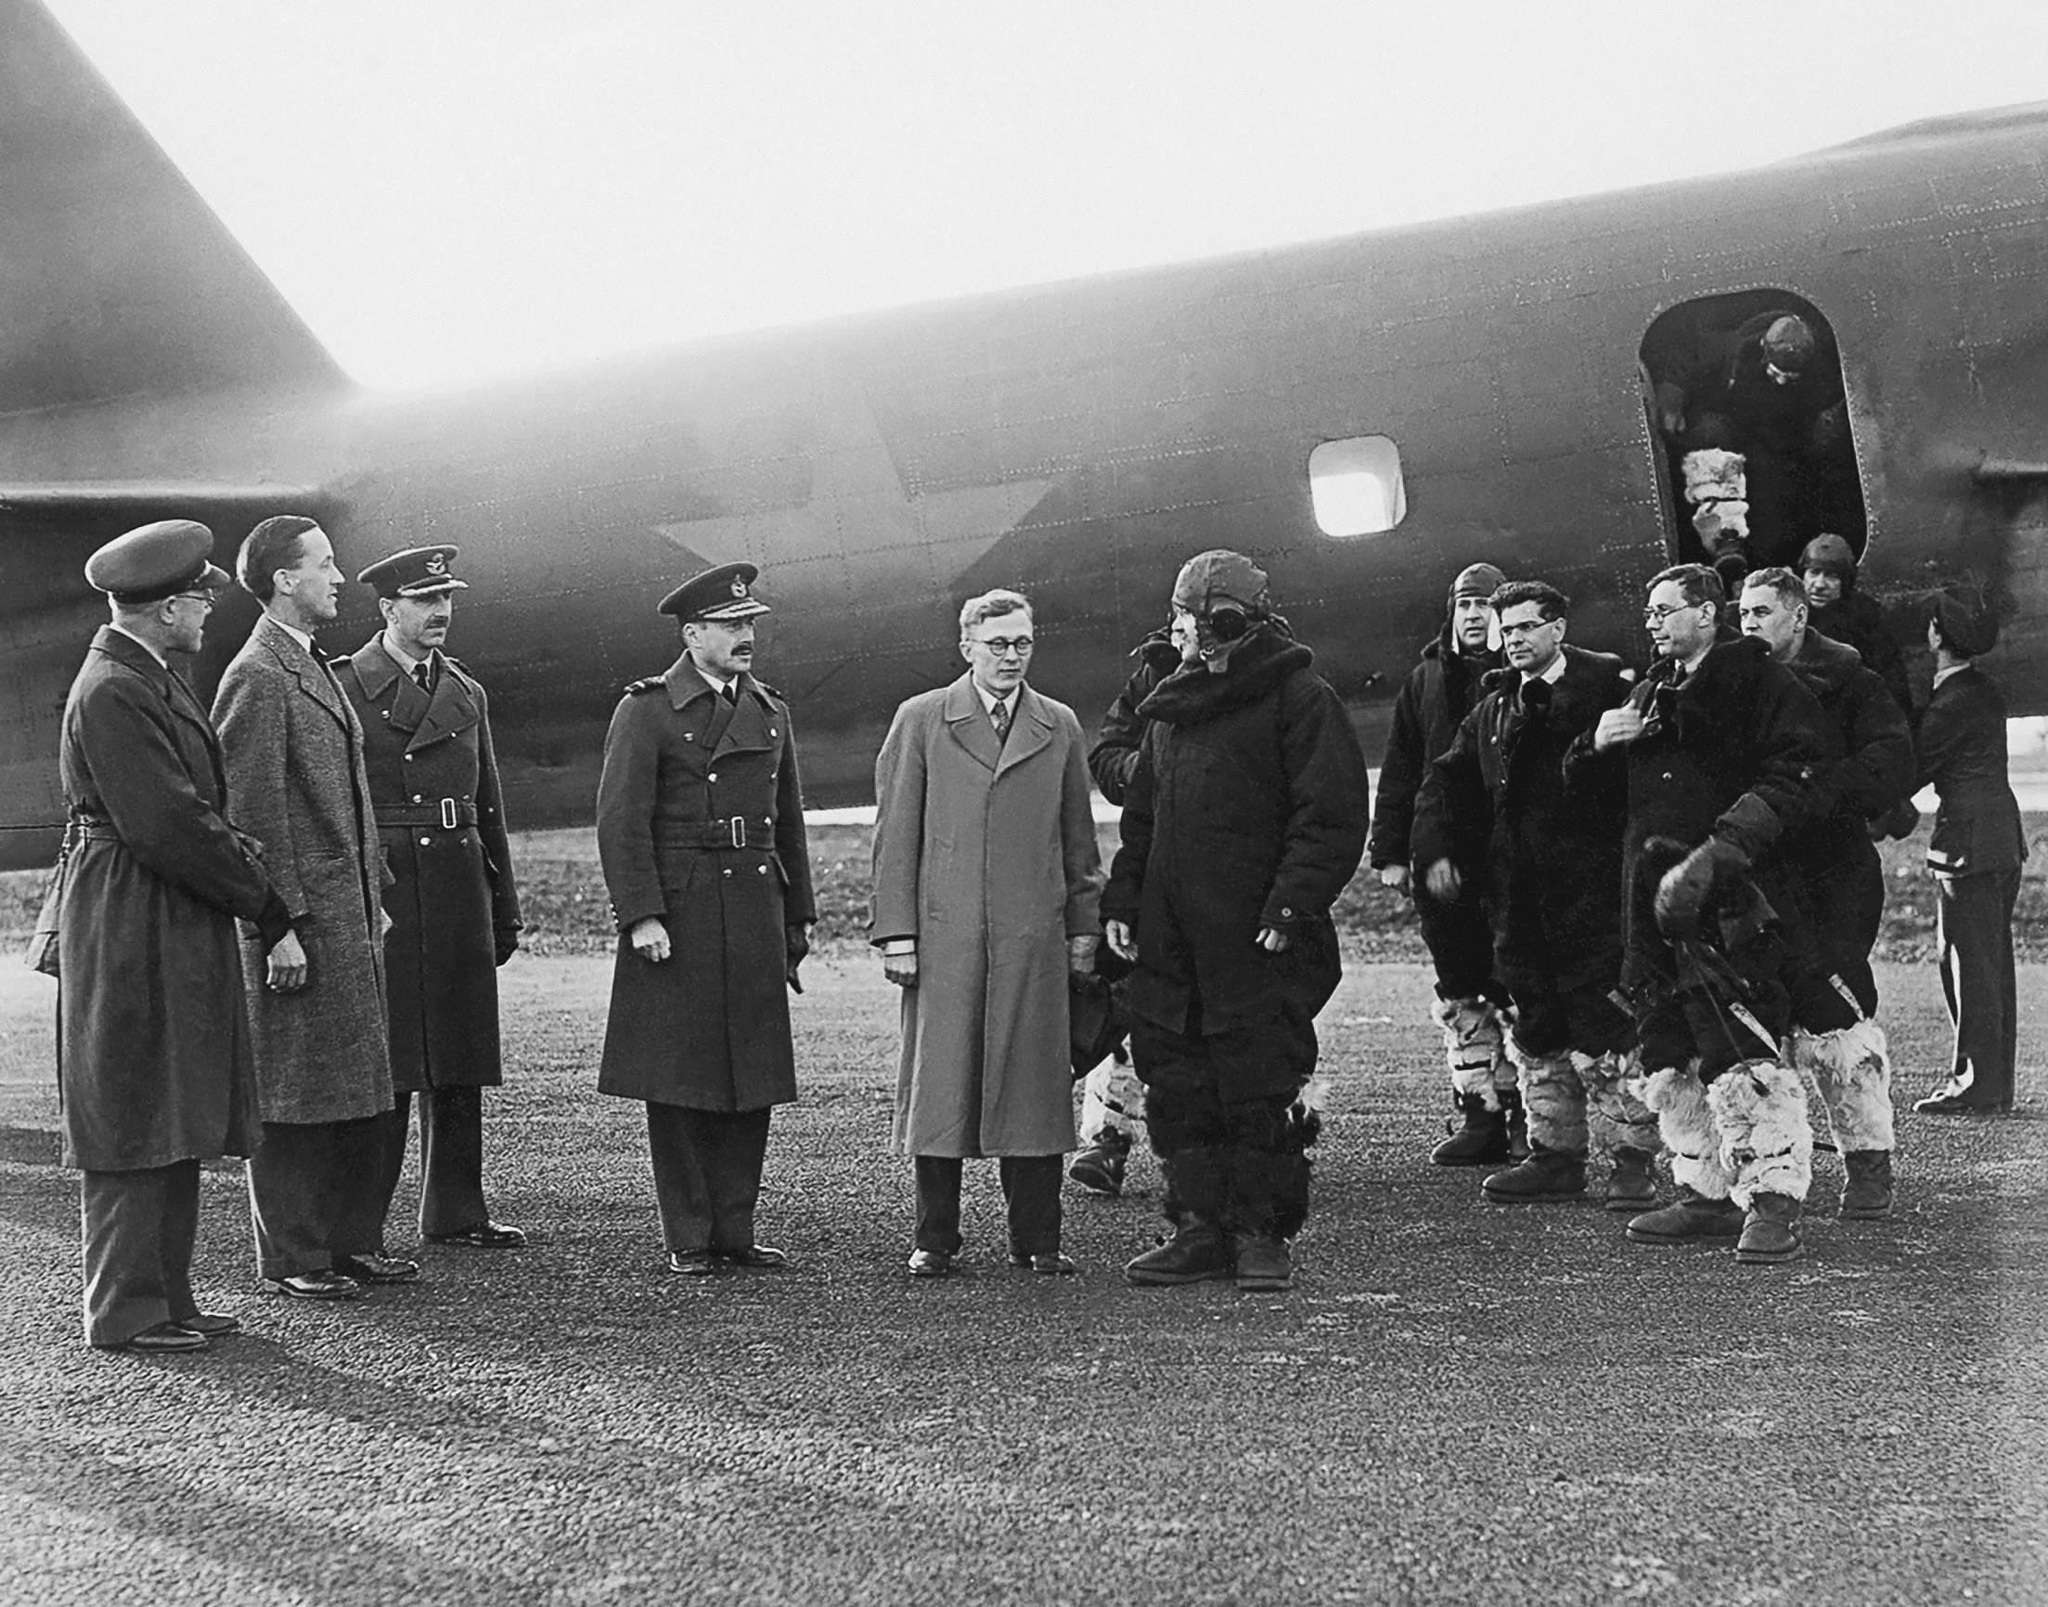 Soviet heavy bomber Pe-8 of the delegation of V.M. Molotov at the Tiling airfield, Scotland, 20.05.1942 - The Second World War, The Great Patriotic War, Airplane, Pe-8, Bomber, Vyacheslav Molotov, Scotland, Historical photo, Military history, Longpost